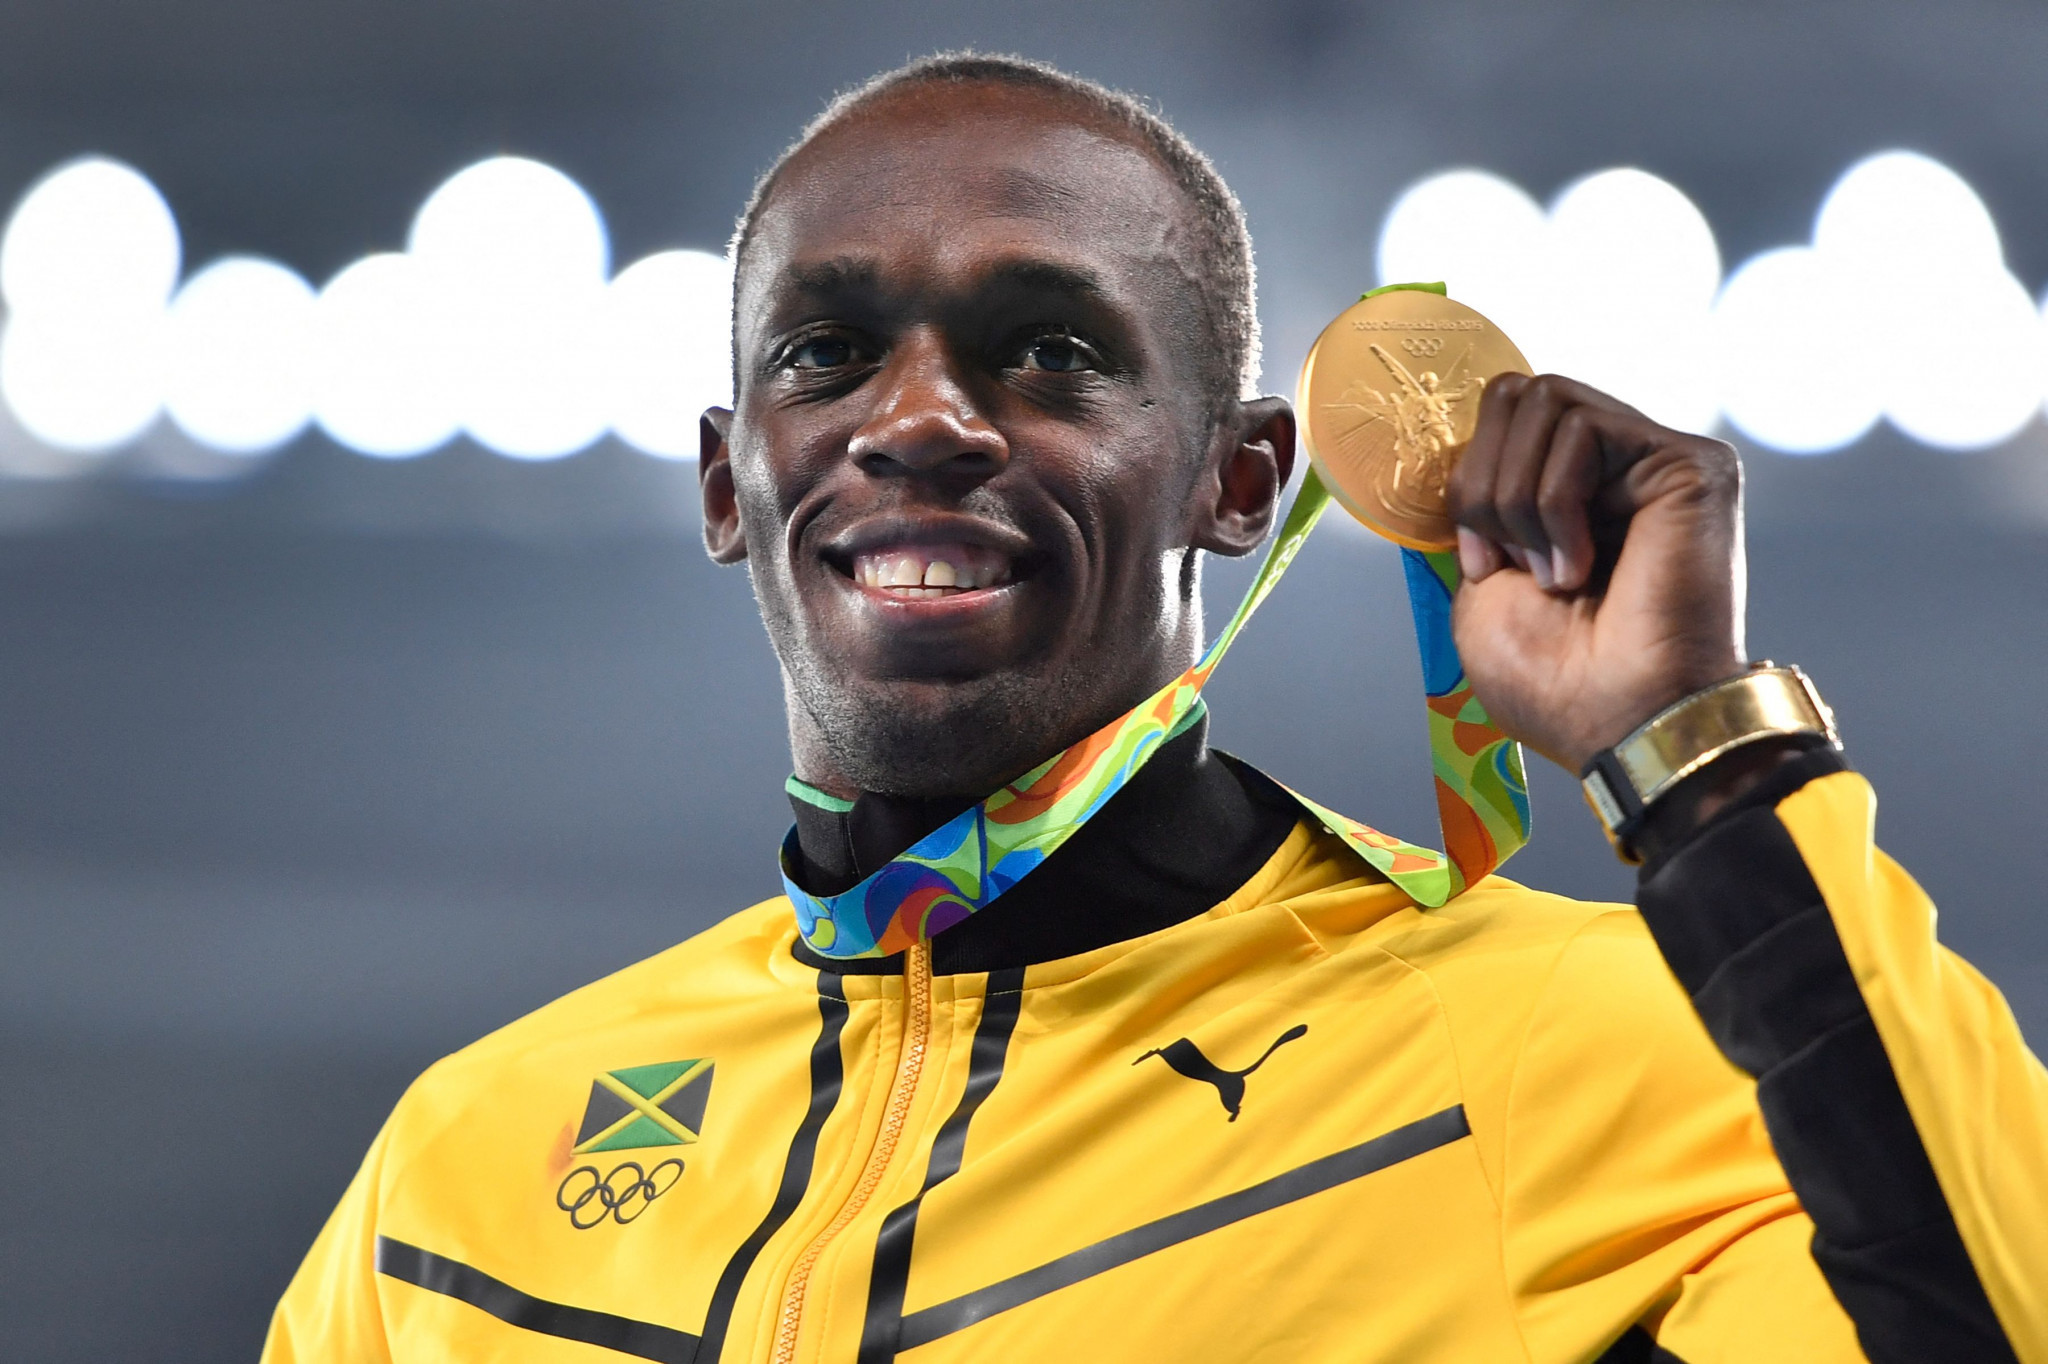 Former Jamaican sprinter Usain Bolt has reportedly found millions of dollars missing from an account with an investment firm ©Getty Images